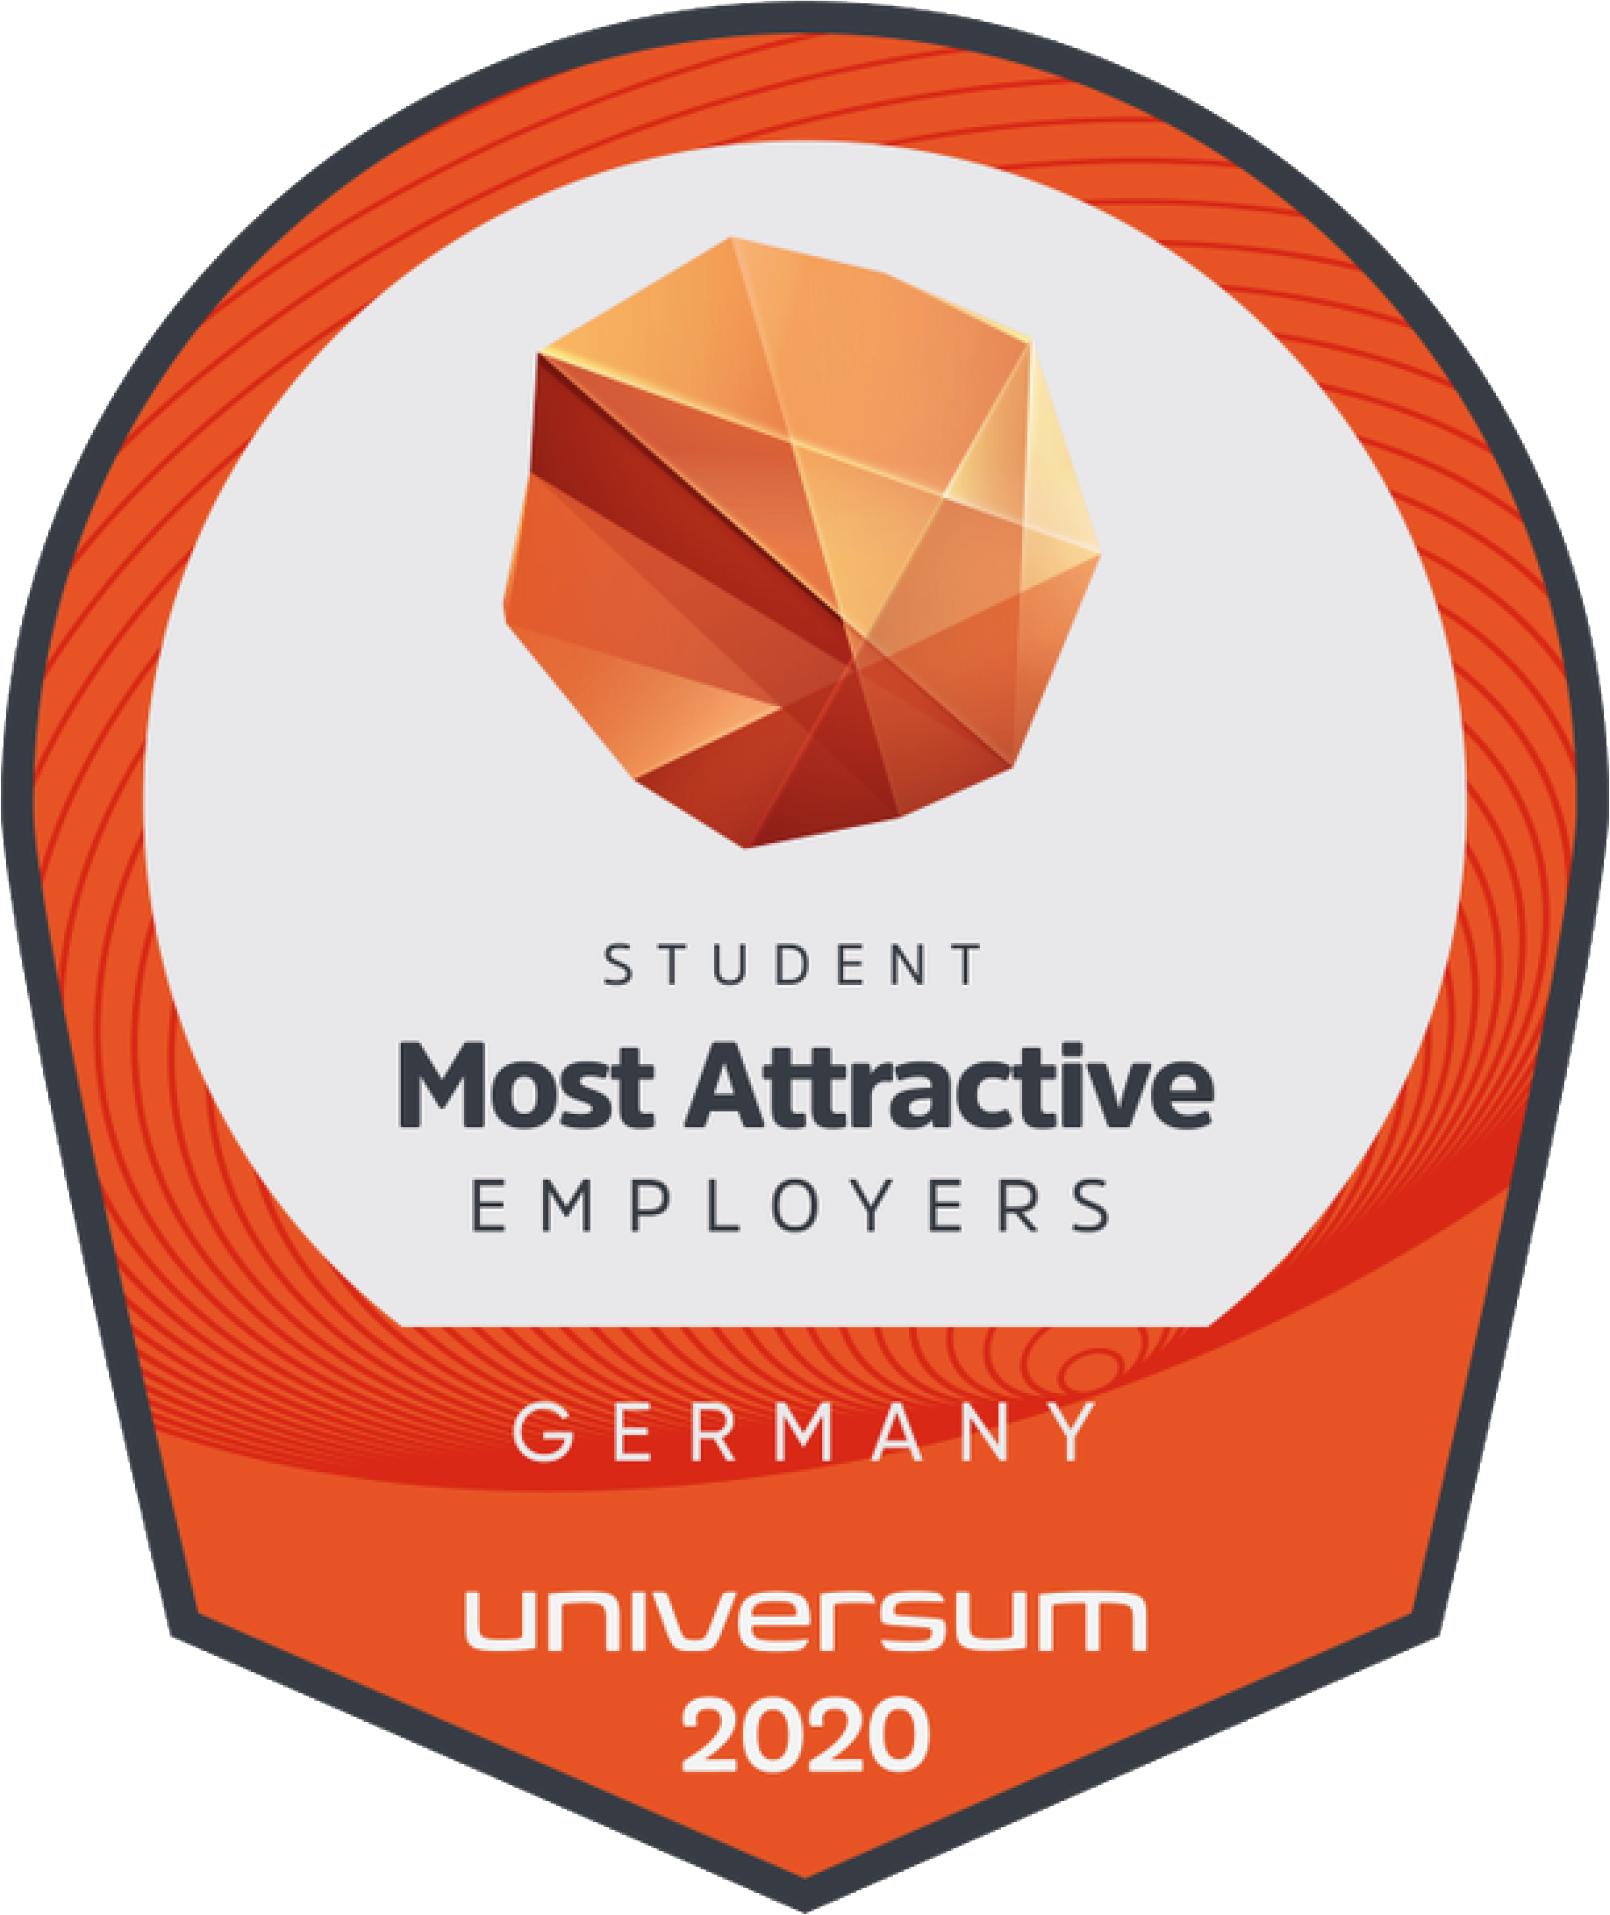 World's most attractive employers